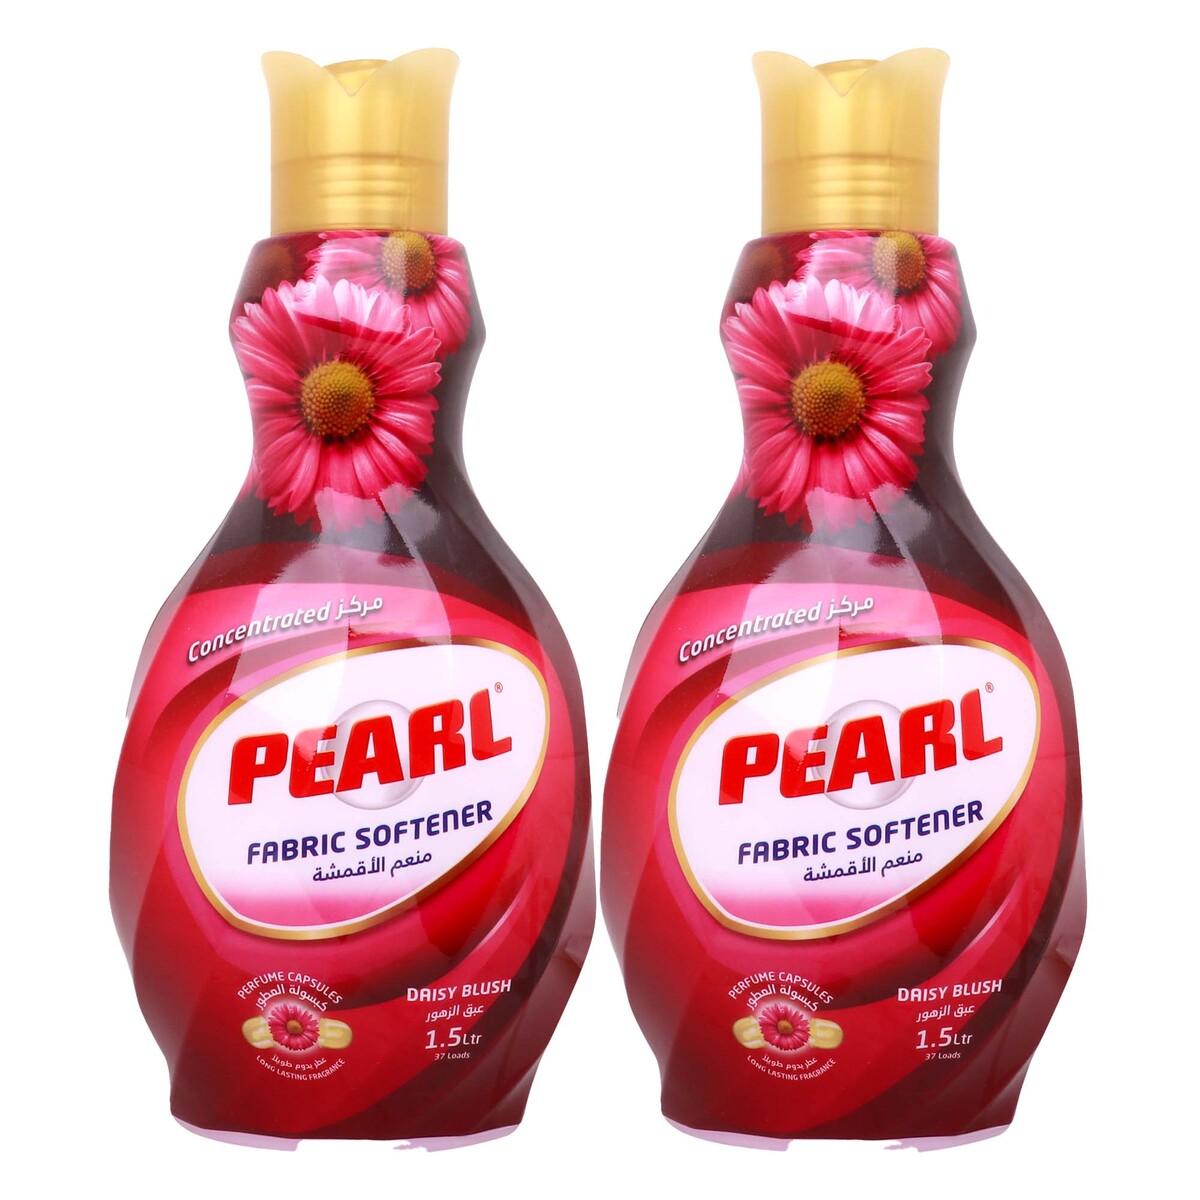 Pearl Daisy Blush Concentrated Fabric Softener 2 x 1.5 Litres